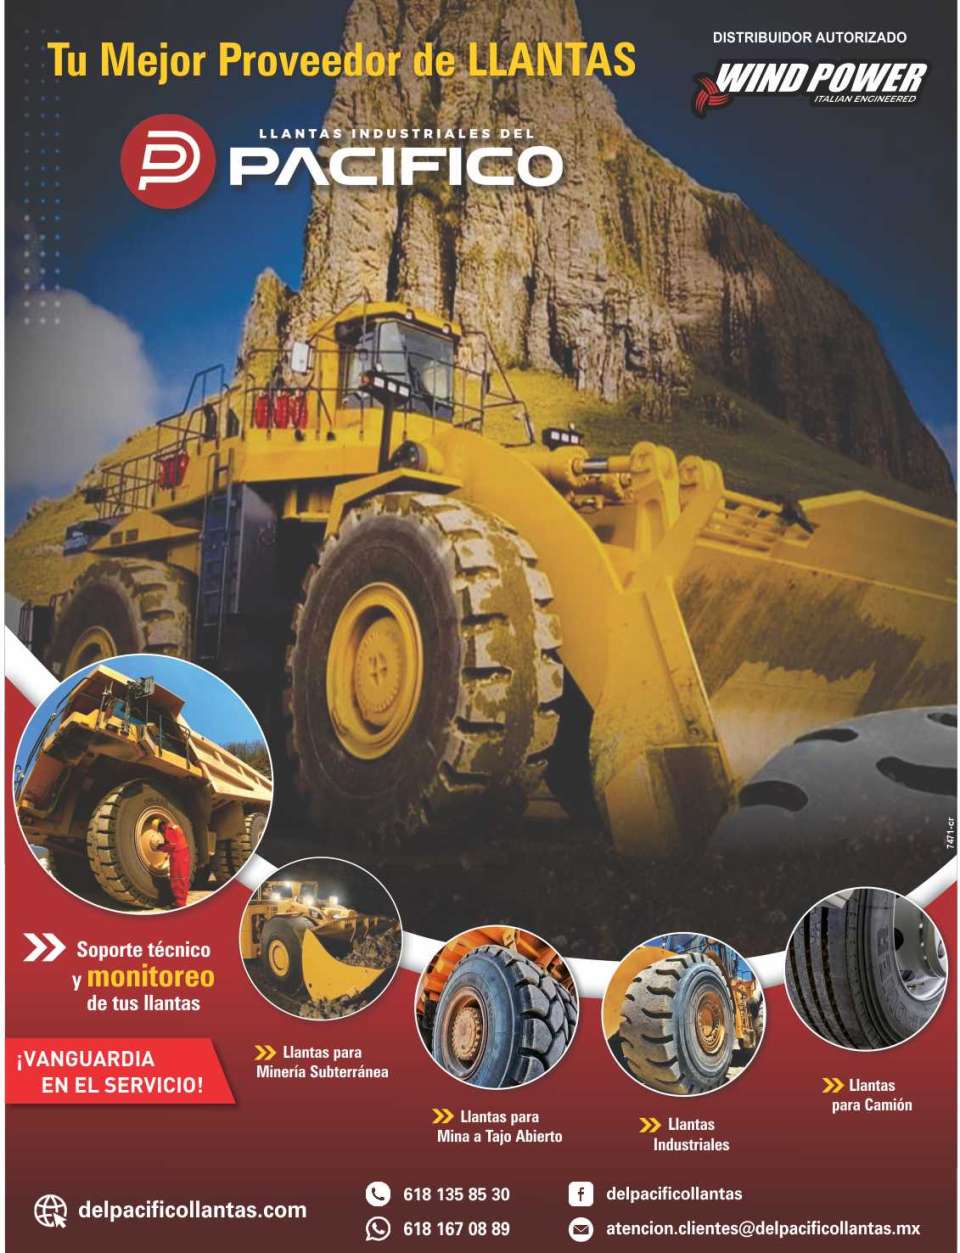 Your best supplier of Industrial Tires, technical support and monitoring of your tires, from the Pacific Tires for underground mining, for open pit mines, for trucks